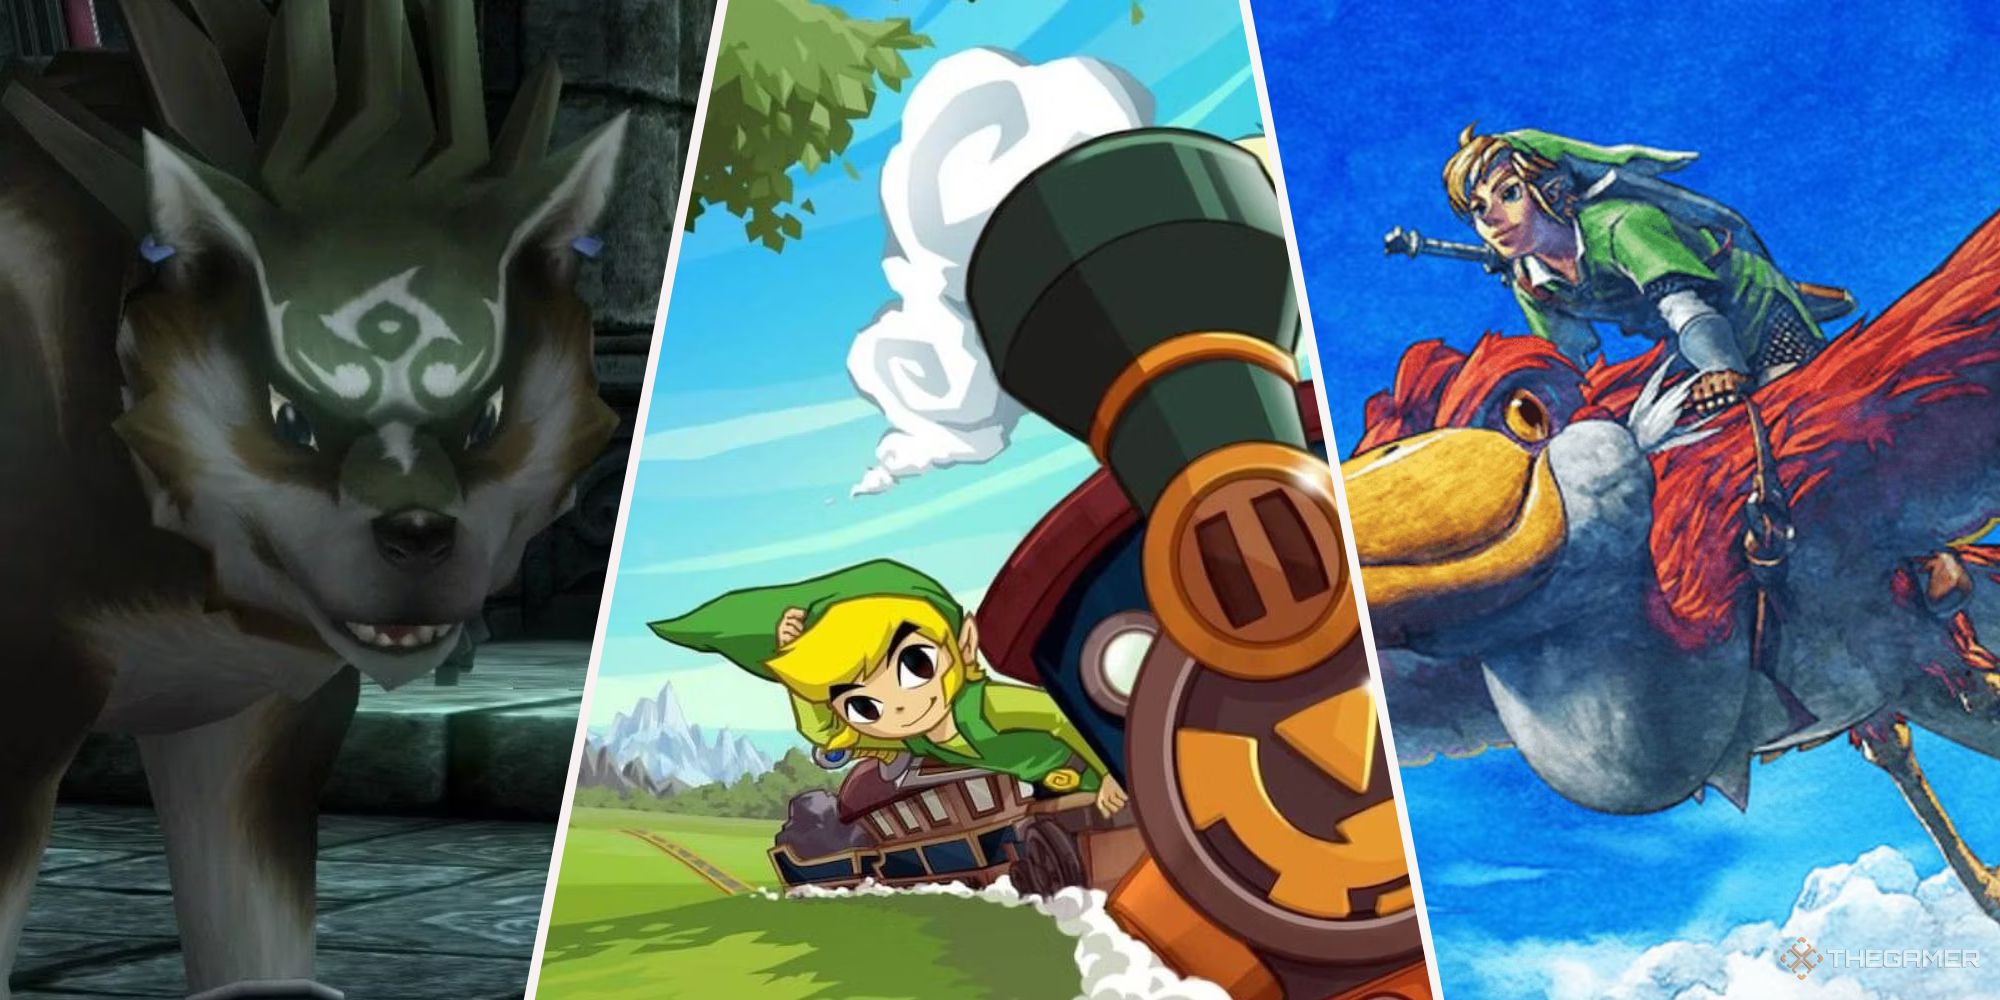 Collage image of wolf link, toon link in the spirit tracks train, and link riding loftwing in The Legend Of Zelda series.